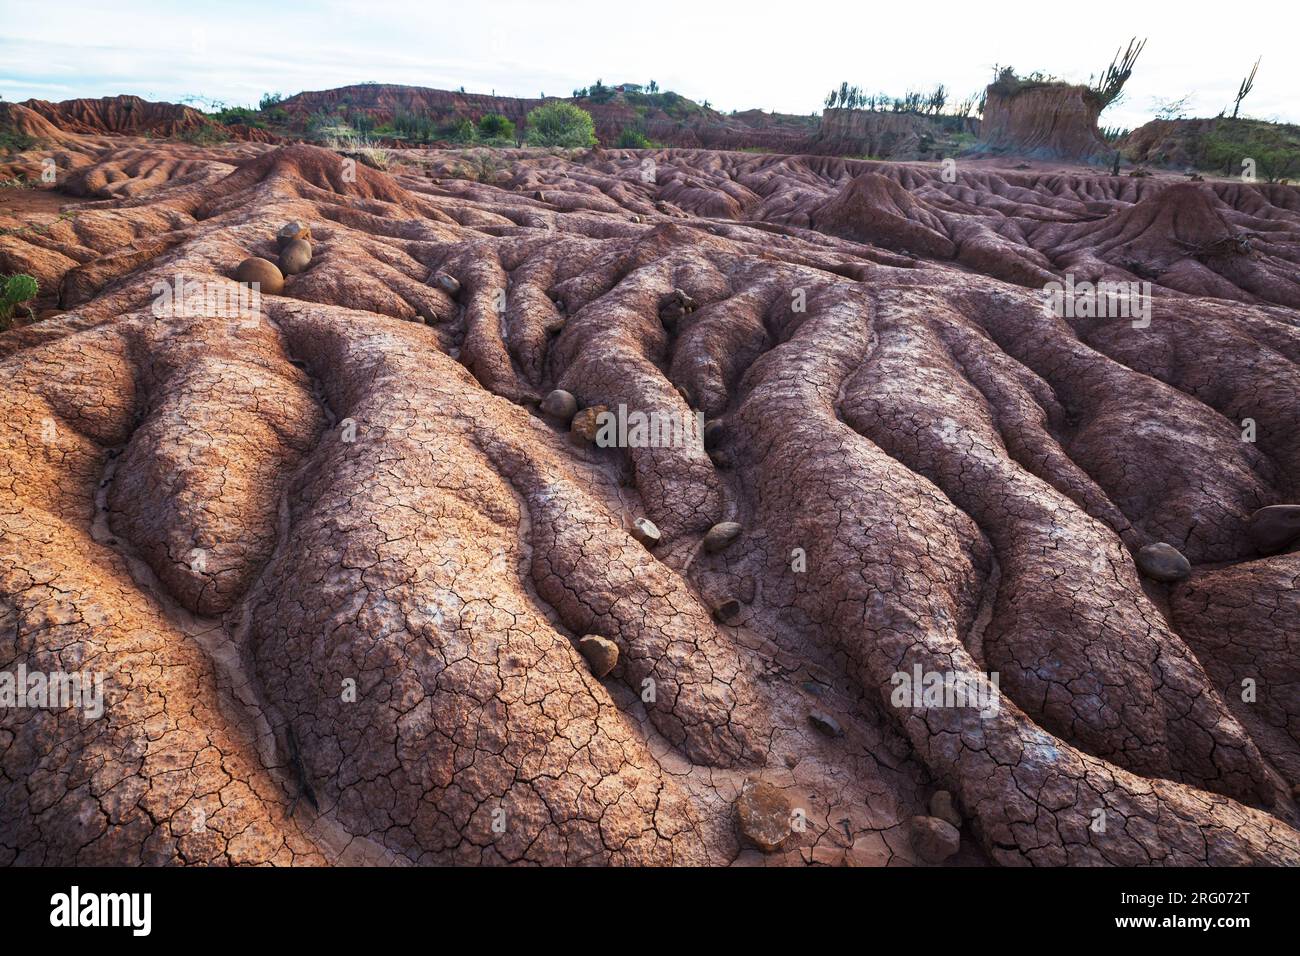 Unusual landscapes in Tatacoa desert, Colombia, South America Stock Photo